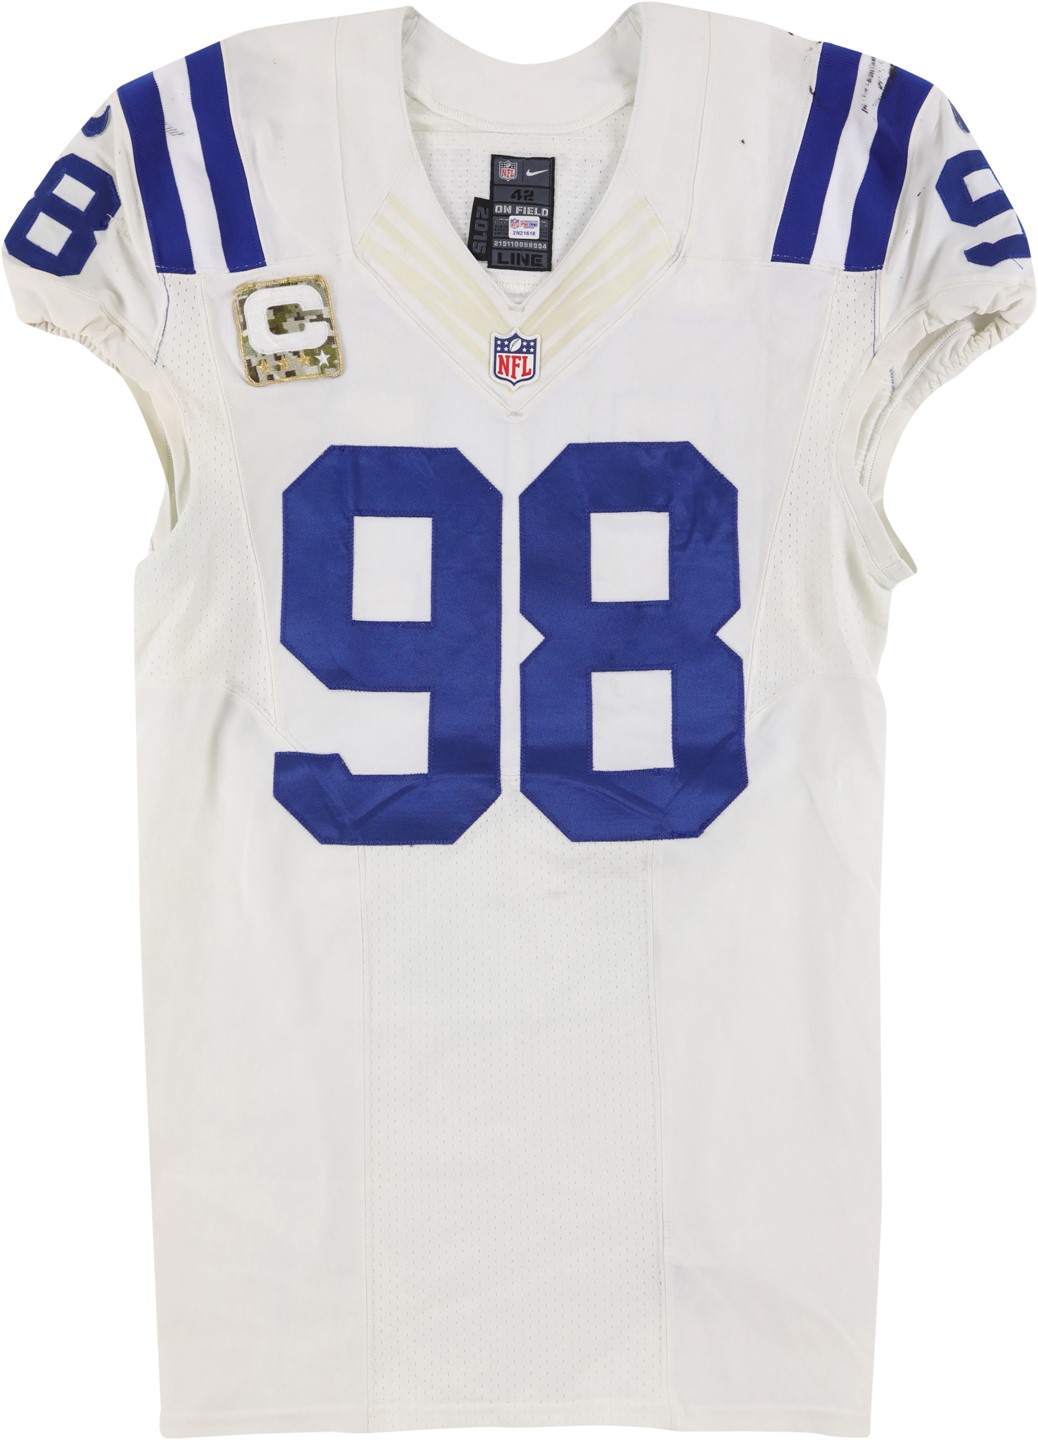 - 11/22/15 Robert Mathis "Salute to Service" Indianapolis Colts Signed Game Worn Jersey (Photo-Matched & NFL PSA)